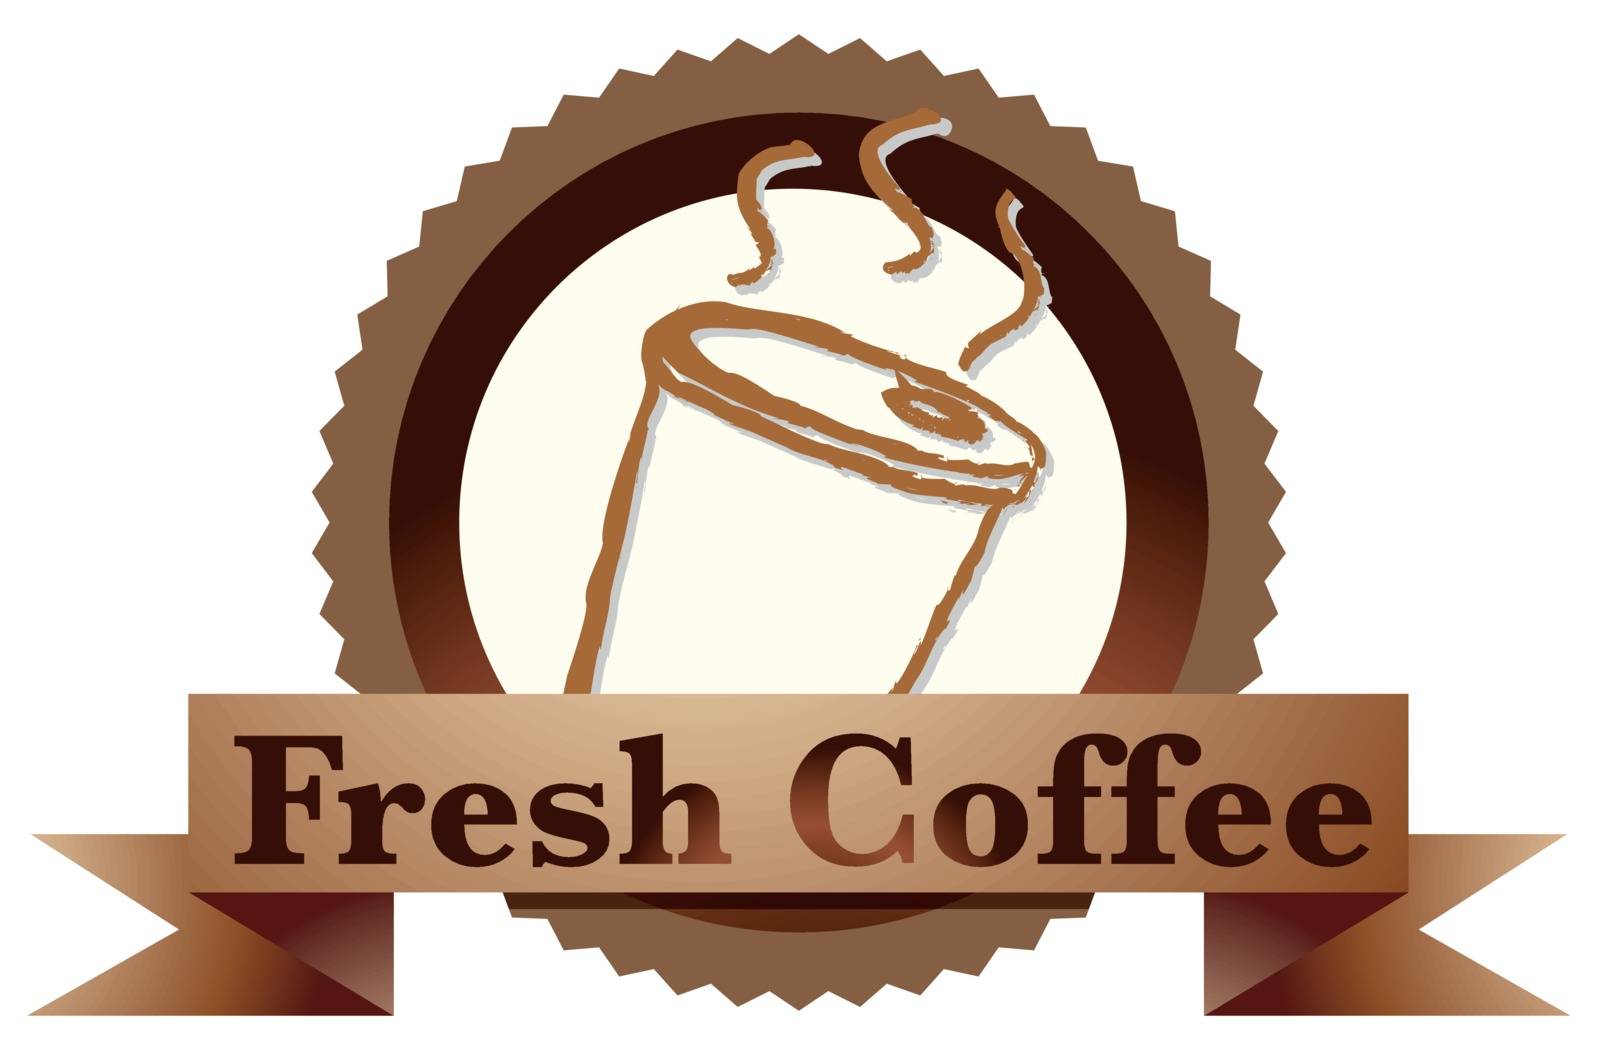 Illustration of a fresh coffee label with a disposable coffee glass on a white background